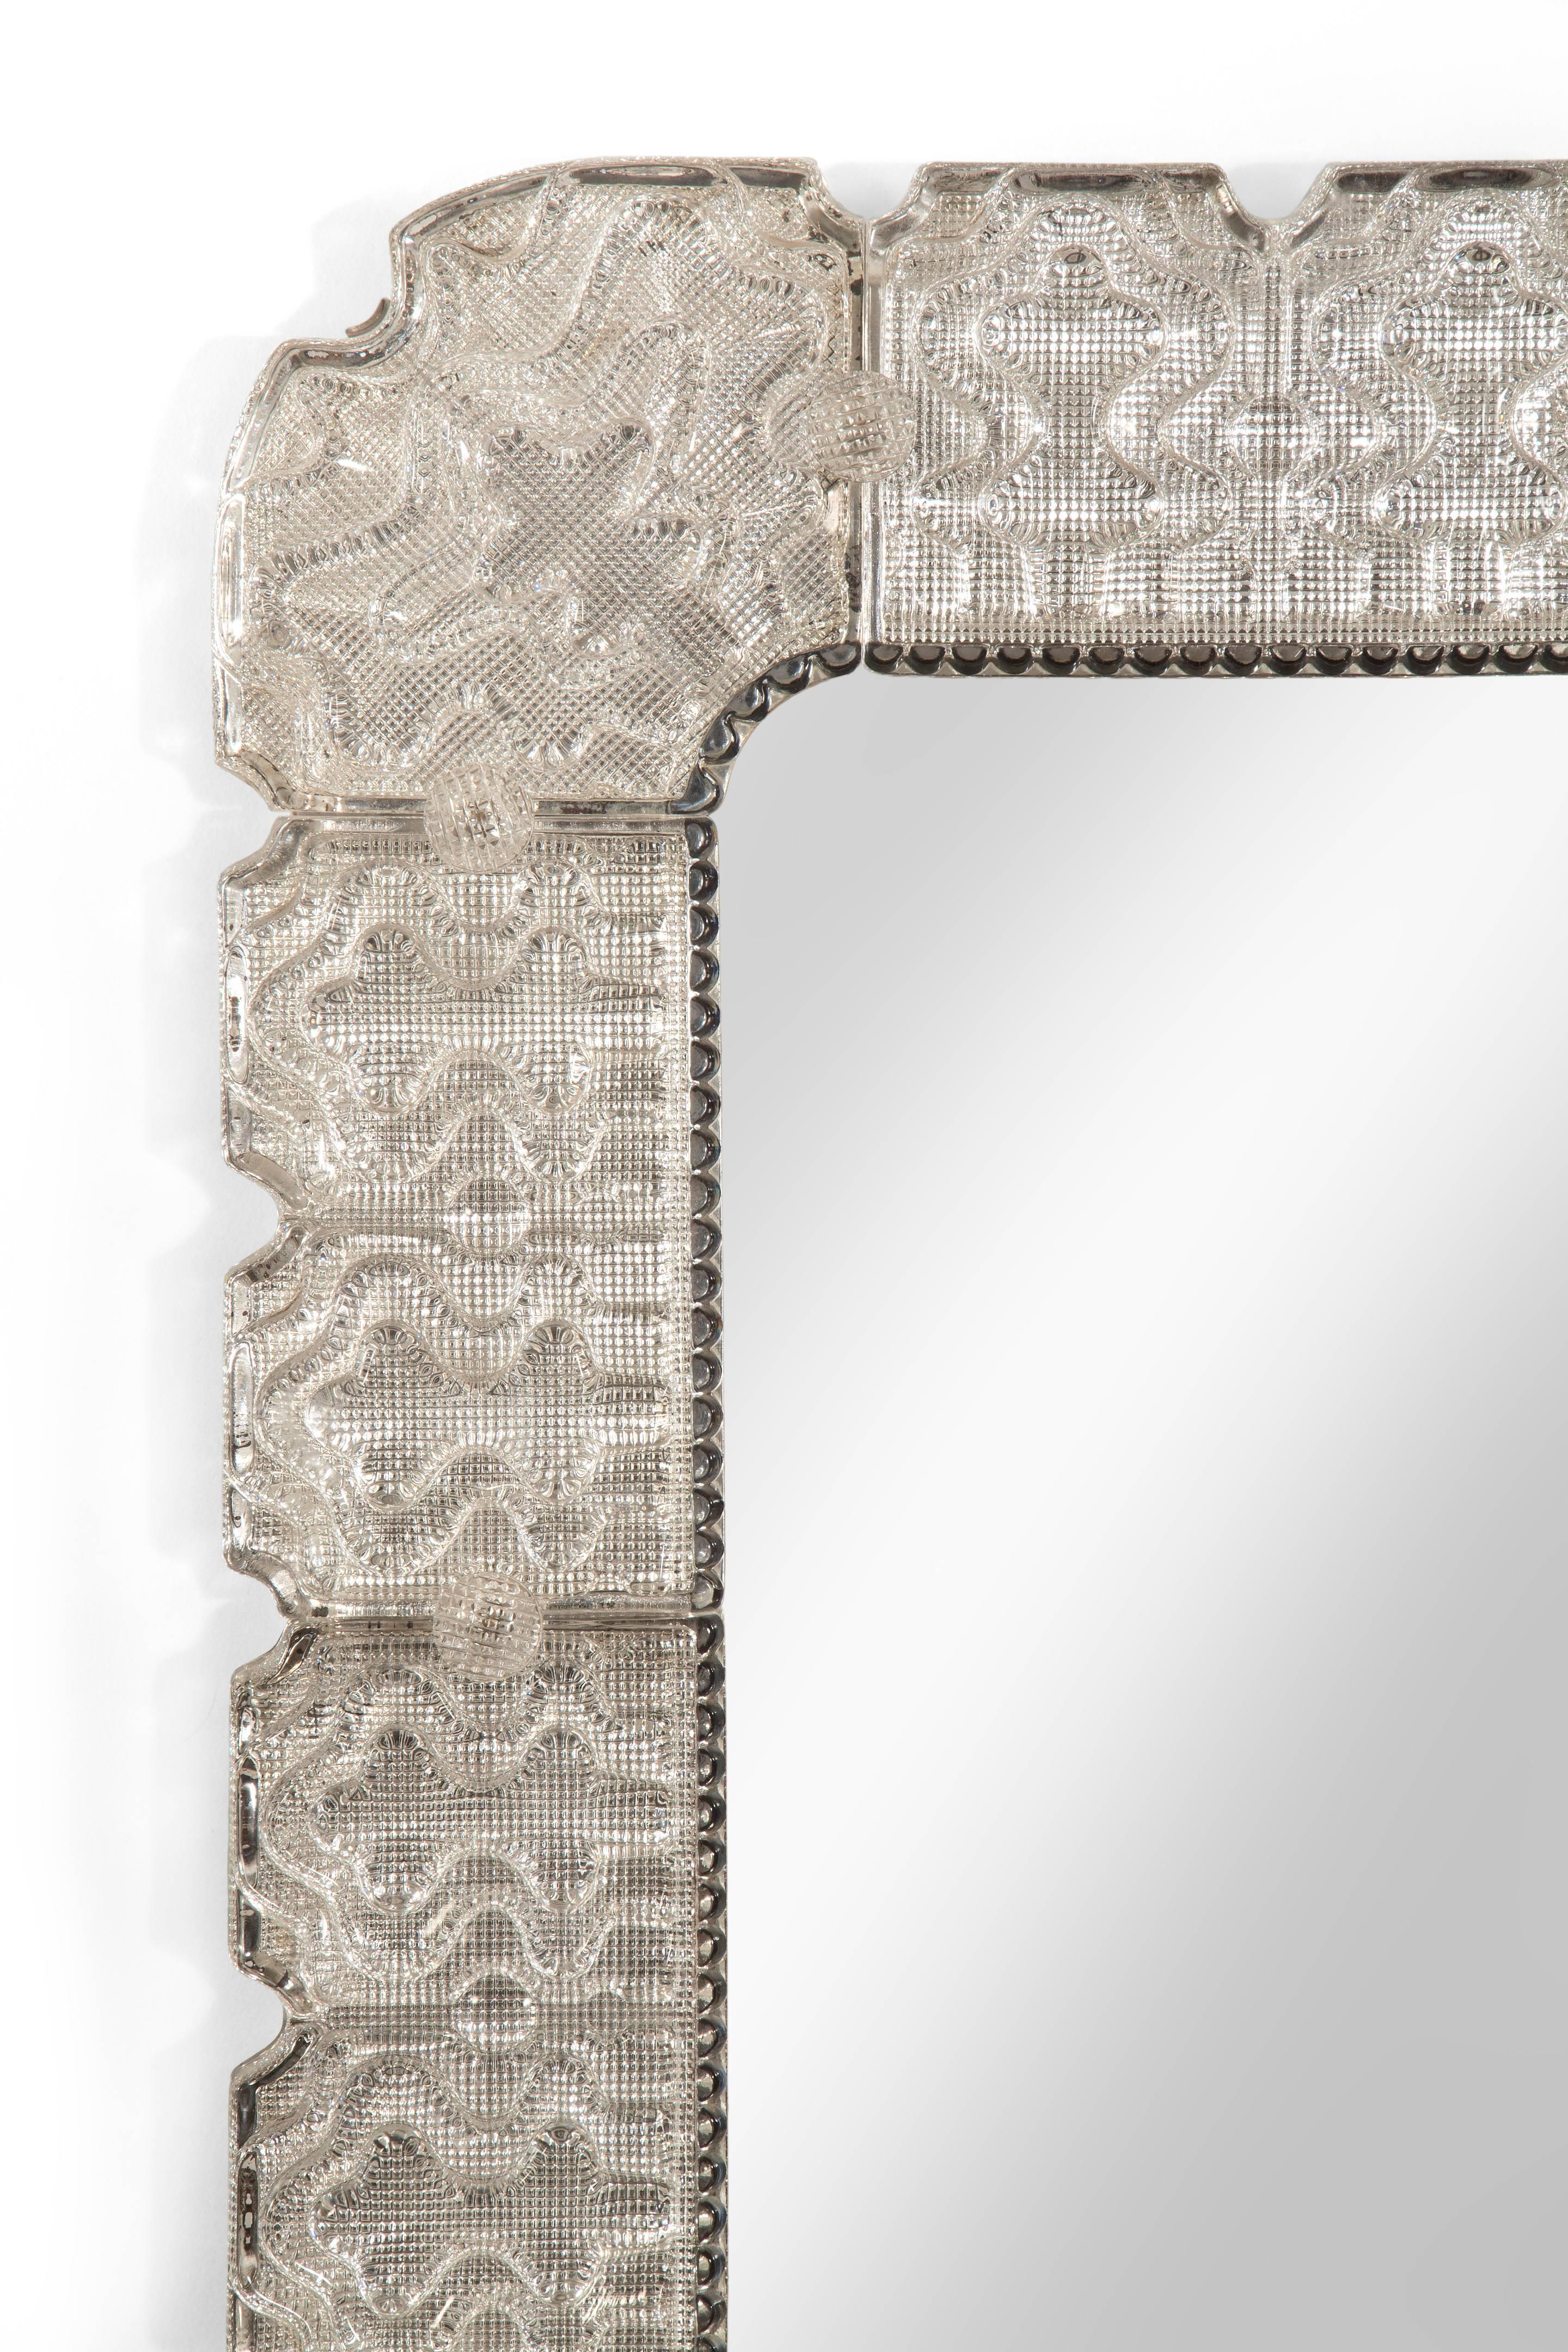 Really beautiful cast glass has an alluring way of responding to light. The rectangular mirror plate with rounded corners and within a glass pearl border, the frame of segmented ice glass attached by glass buttons.

In great overall condition. Ready